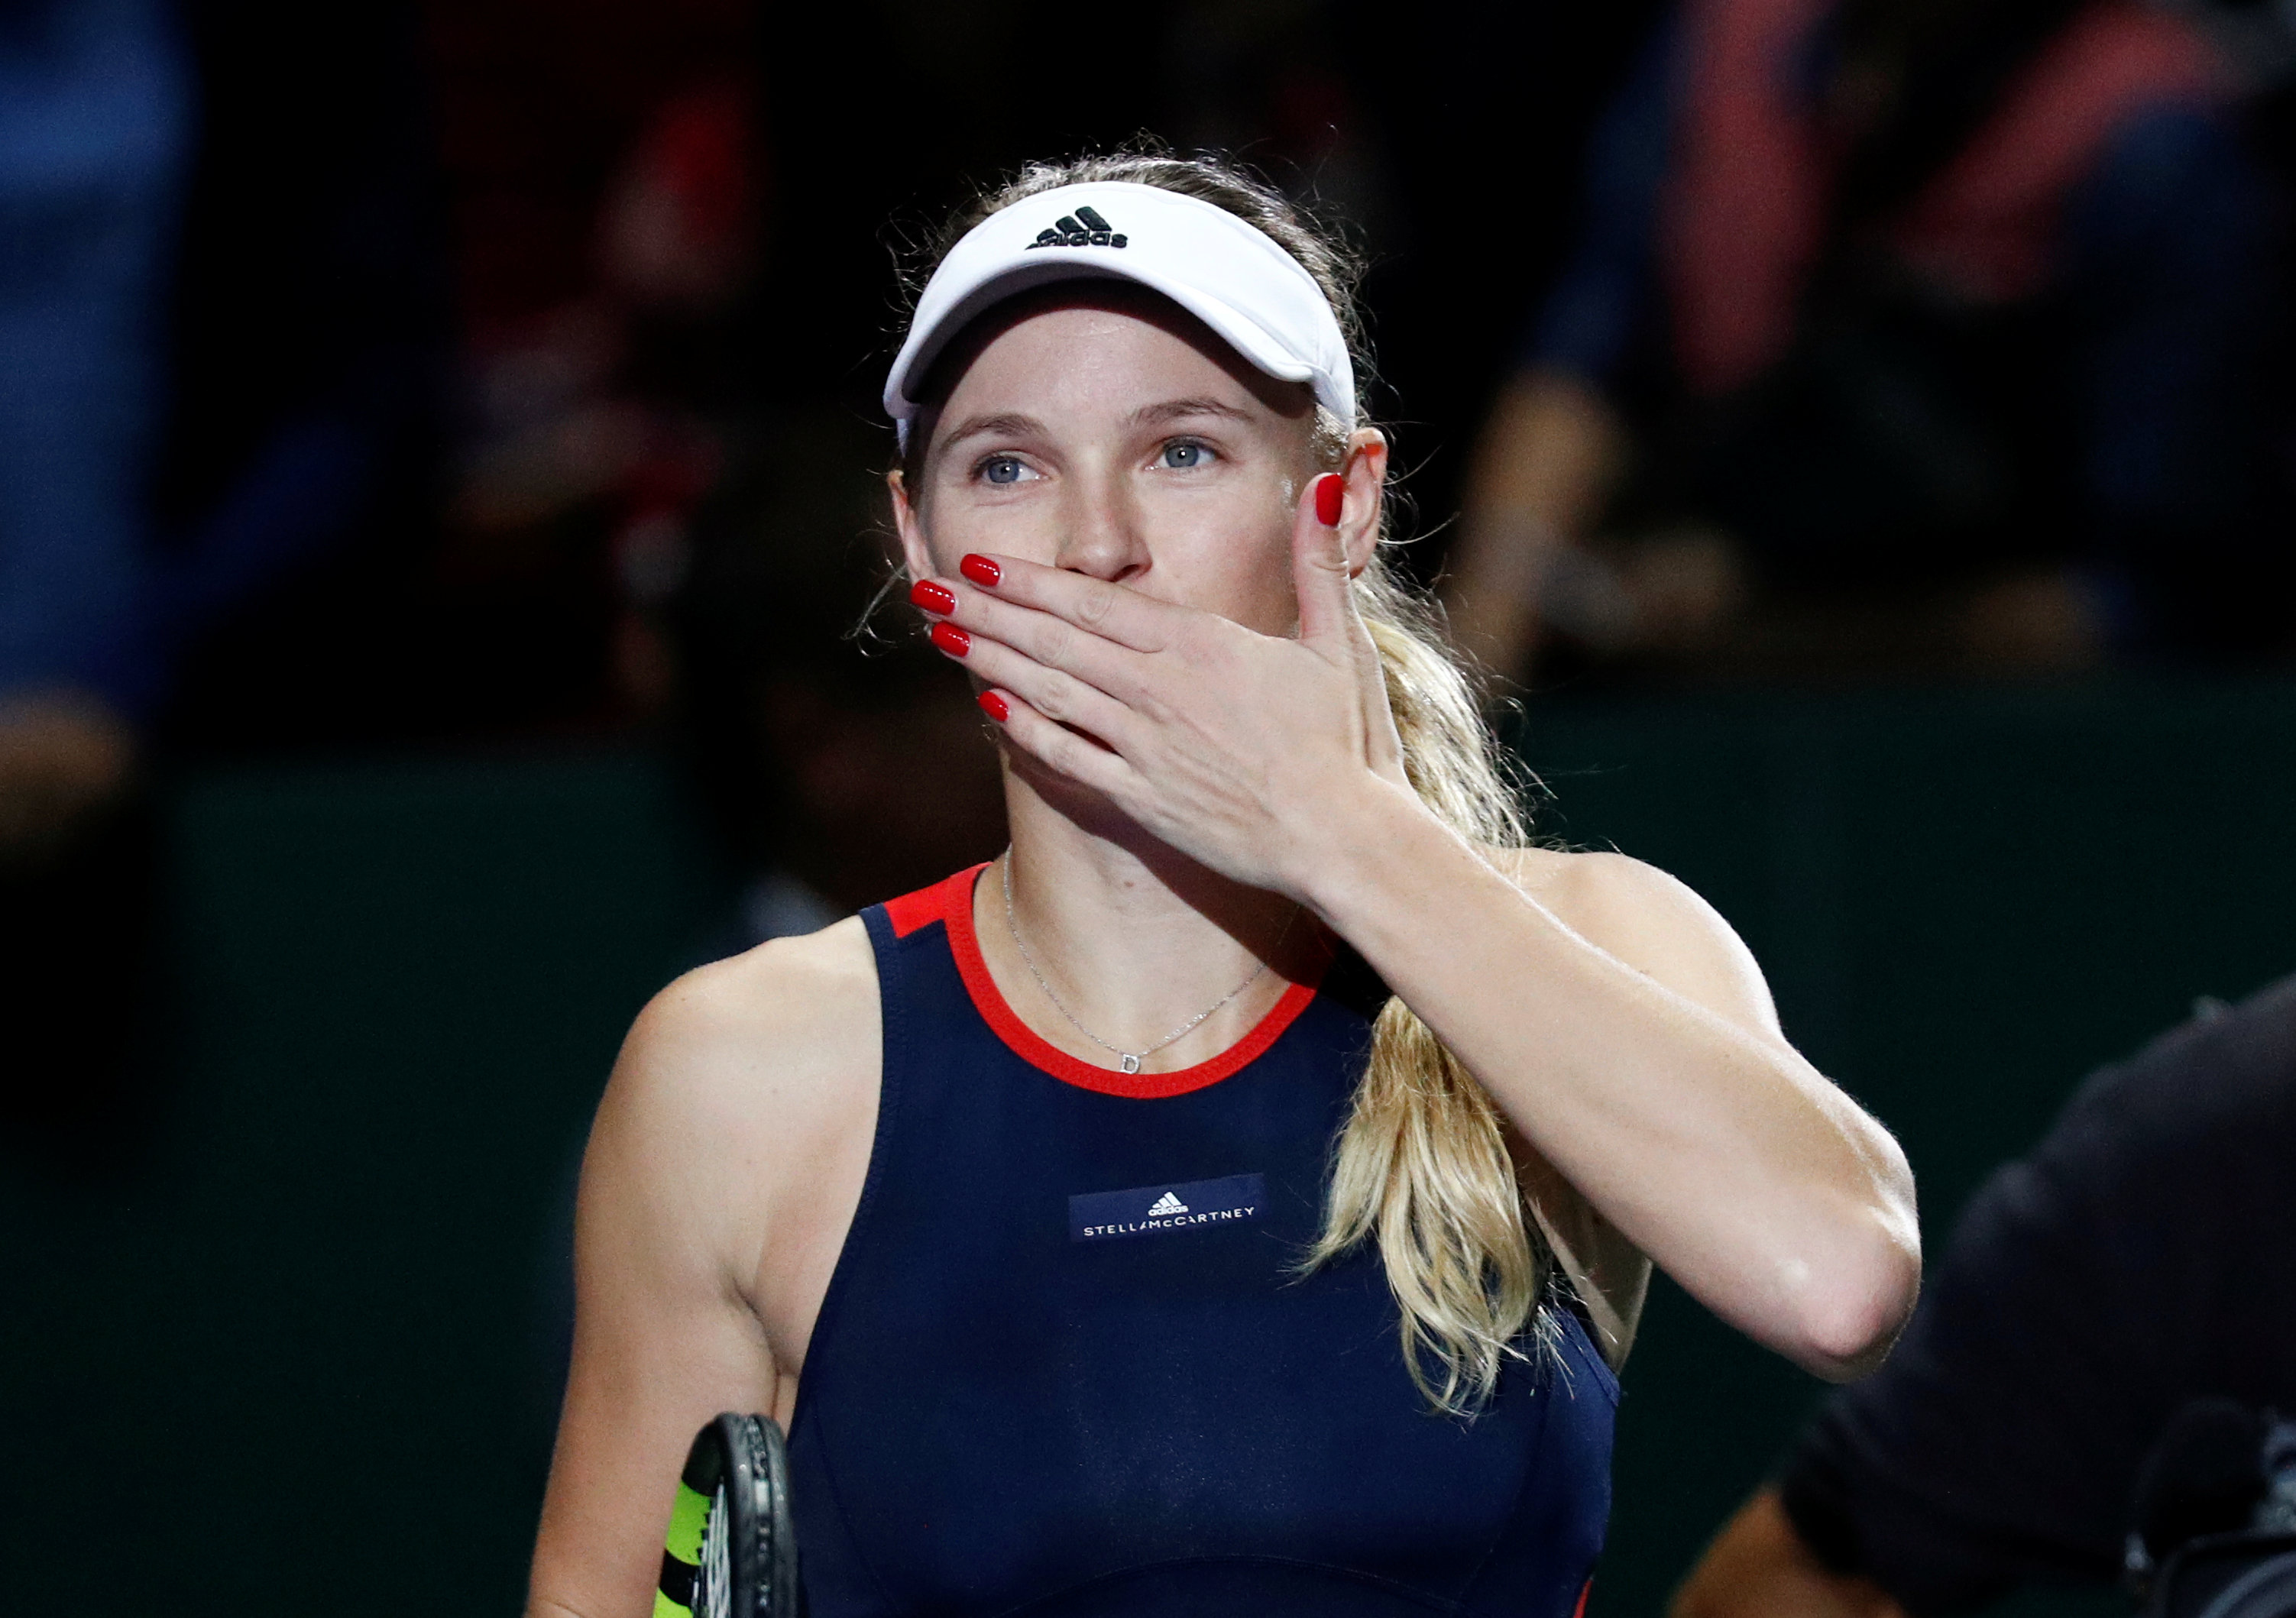 Tennis: Wozniacki stands firm to stay alive in Singapore